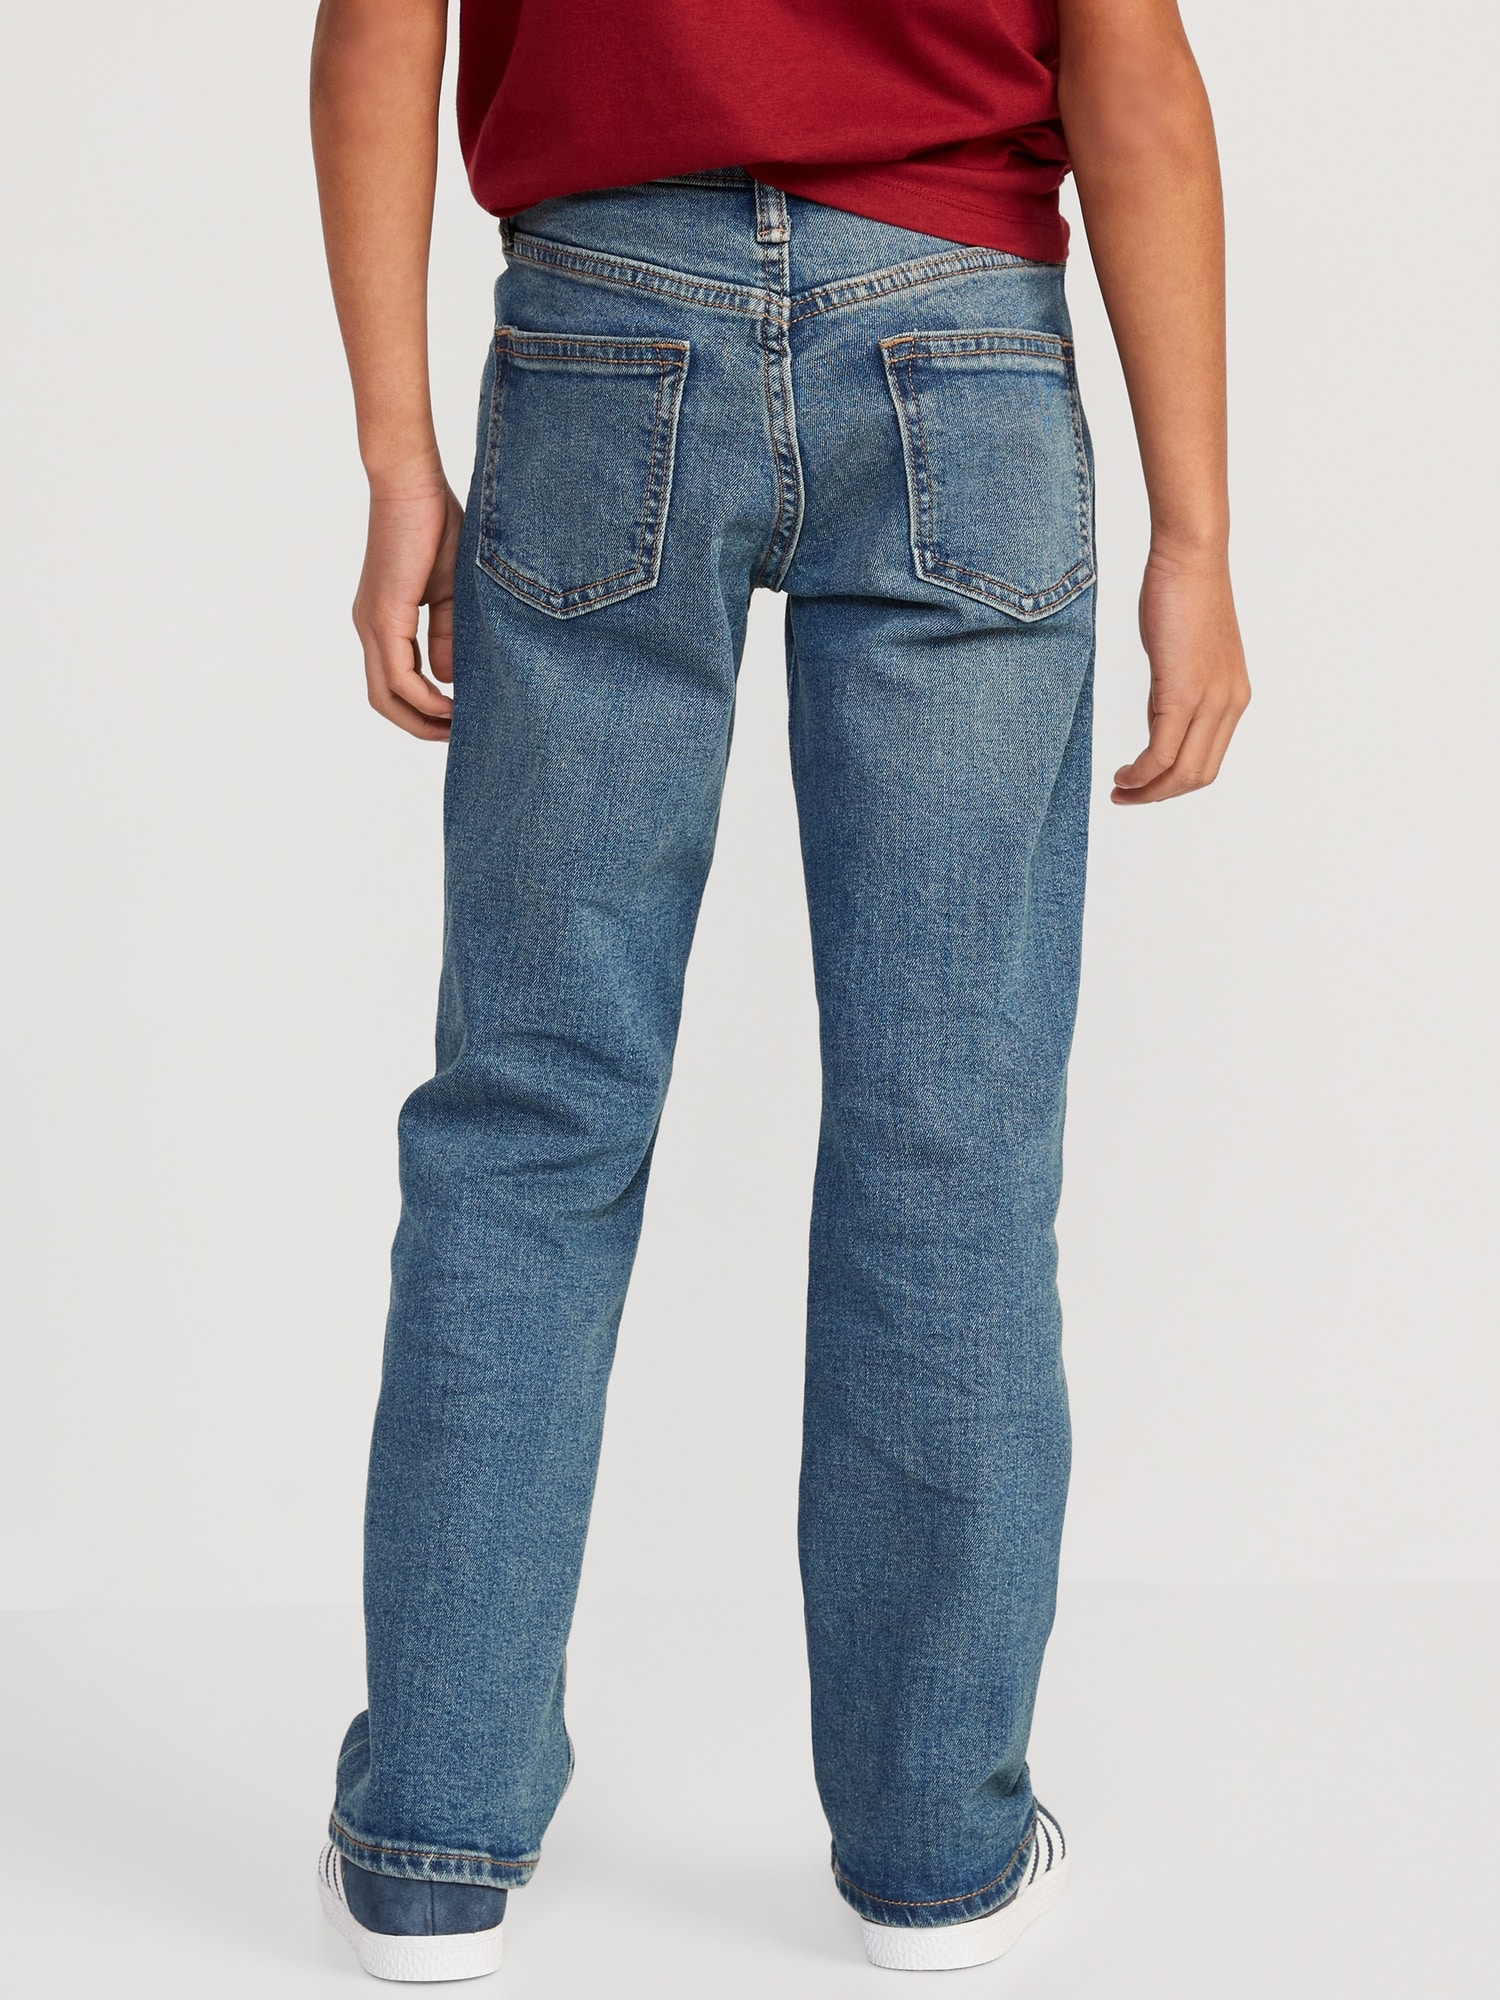 Boot-Cut Built-In Flex Jeans for Boys | Old Navy